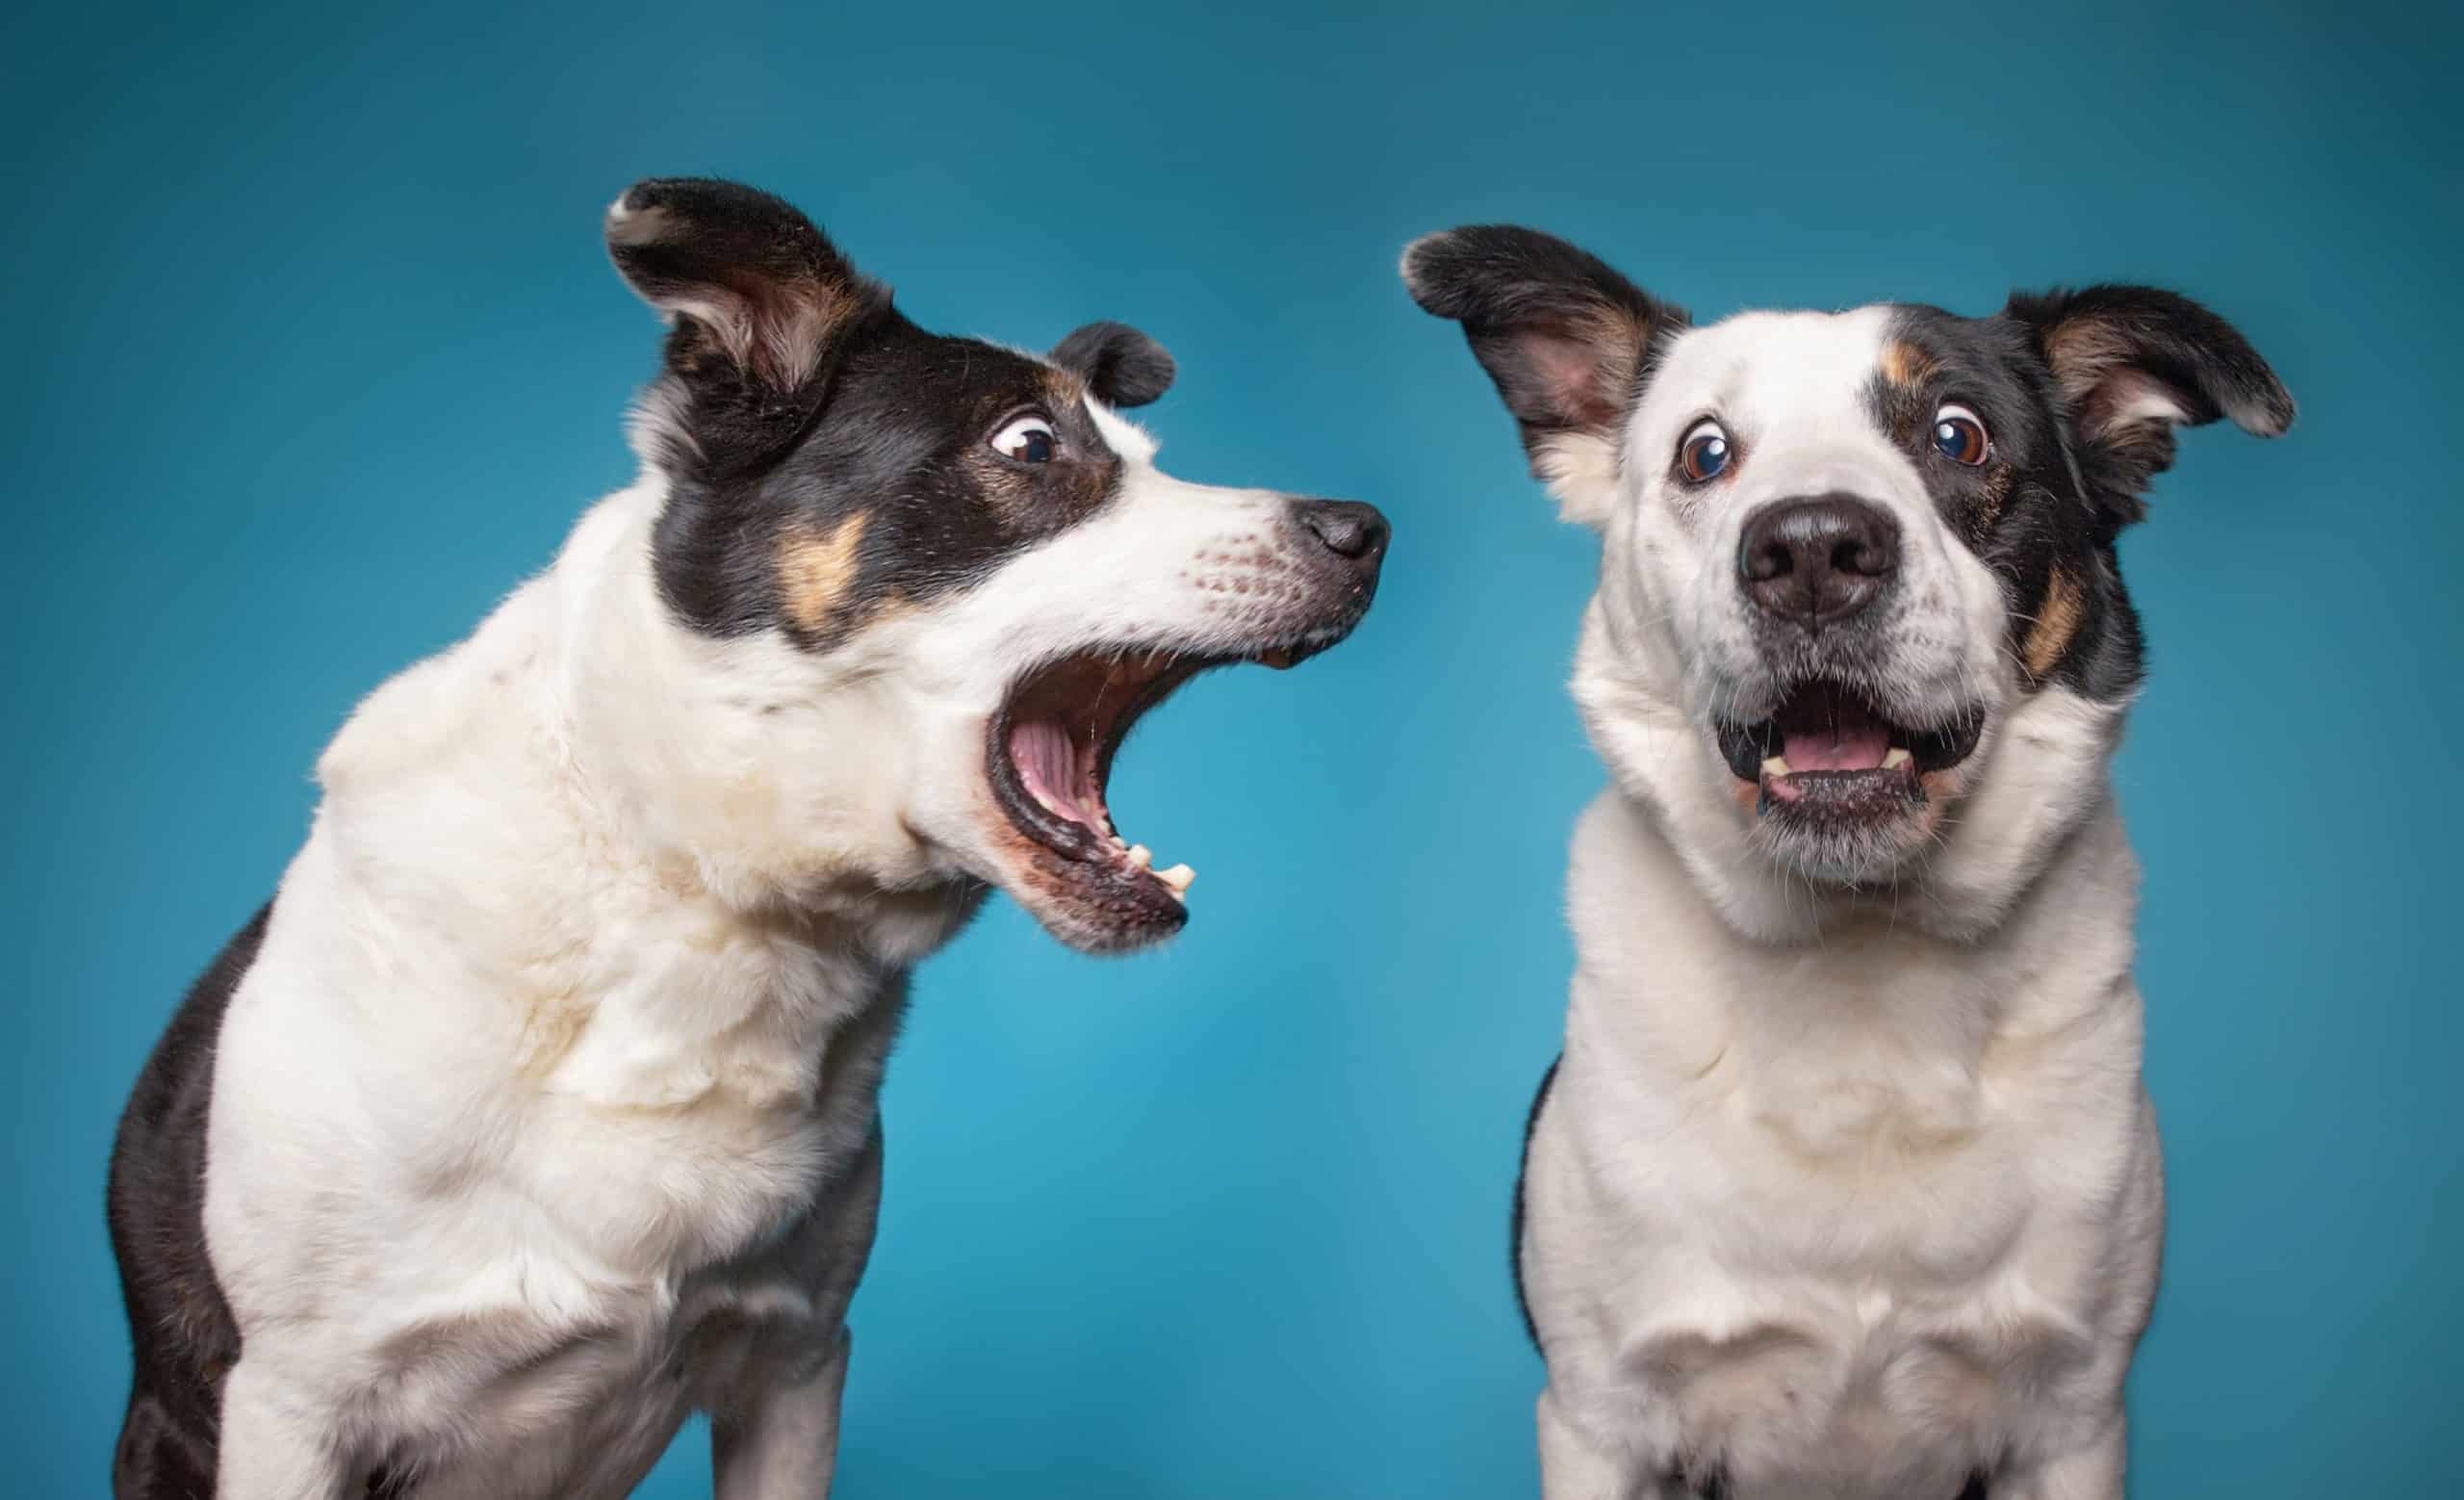 Why do dogs get so excited when they see other dogs?